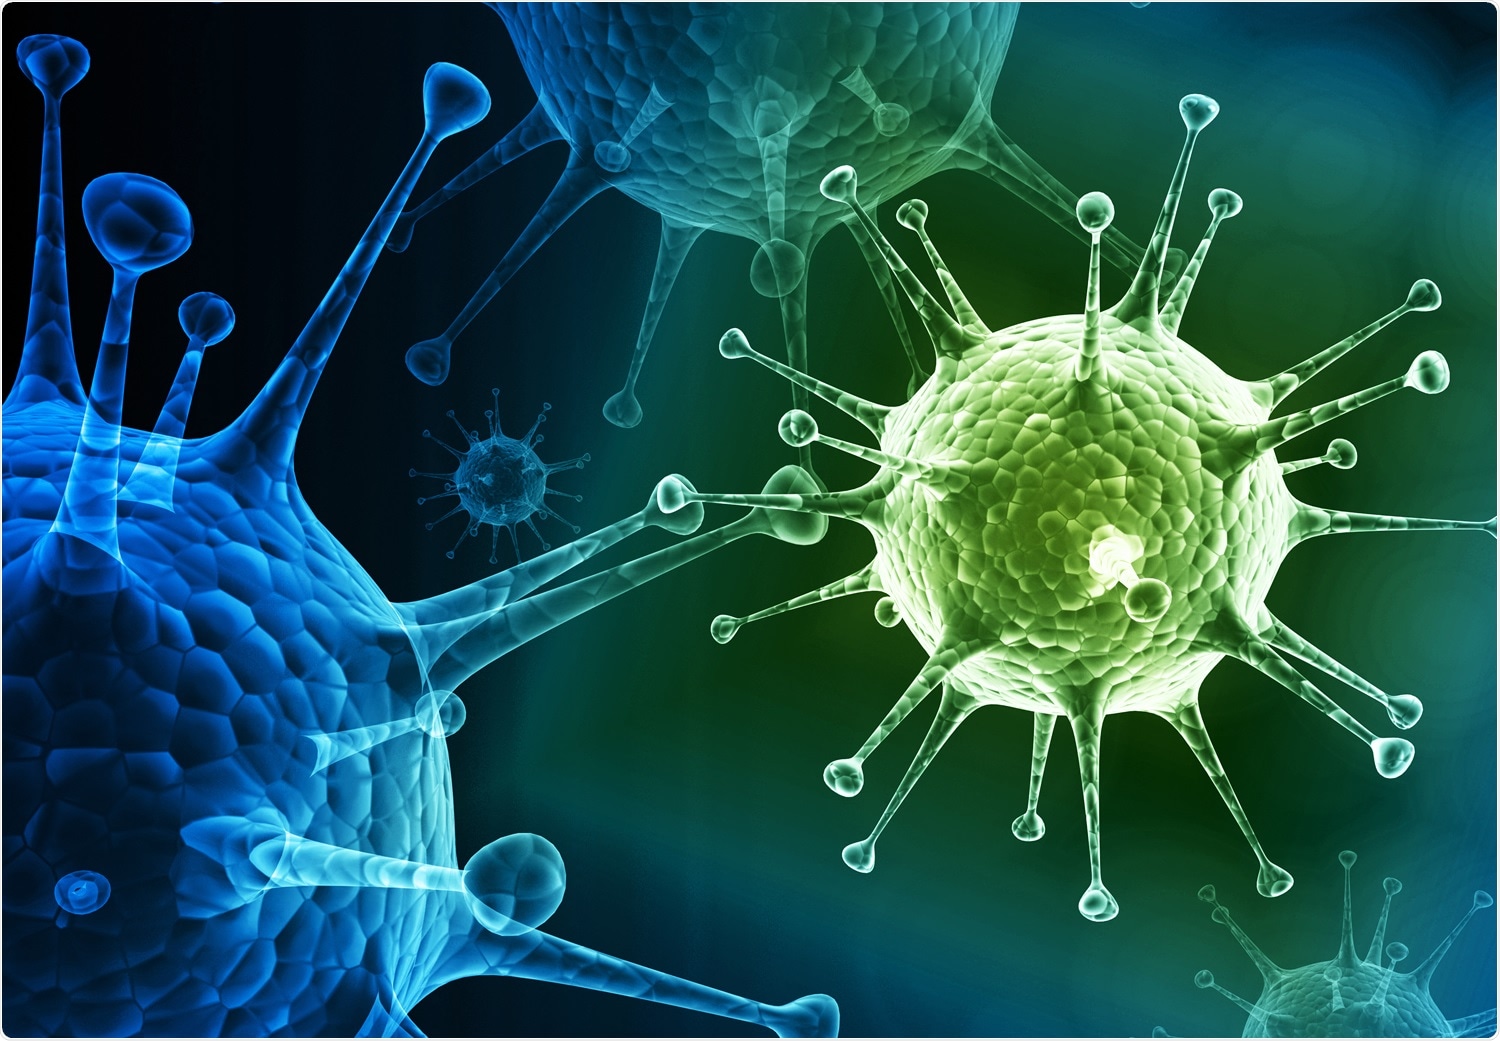 Study: The pitfalls of inferring virus-virus interactions from co-detection prevalence data: Application to influenza and SARS-CoV-2. Image Credit: Mathagraphics / Shutterstock